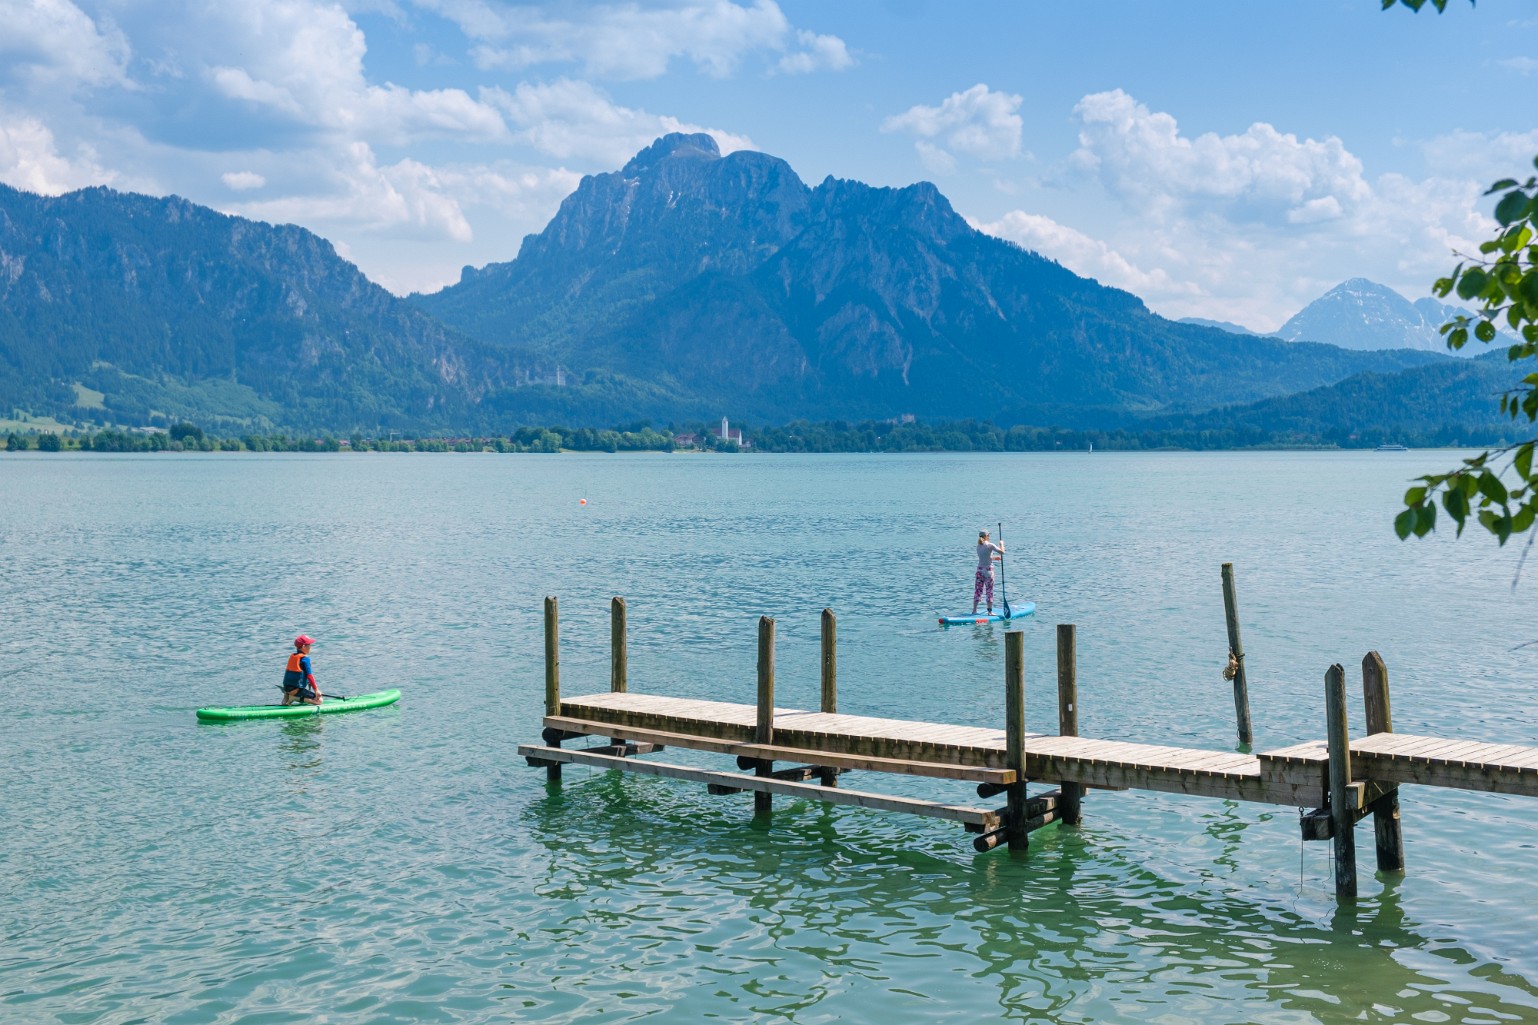 Forggensee_0560_2023-06-X-T4_31,5mm_f6,4_500s_160 ISO_LR_4kPx